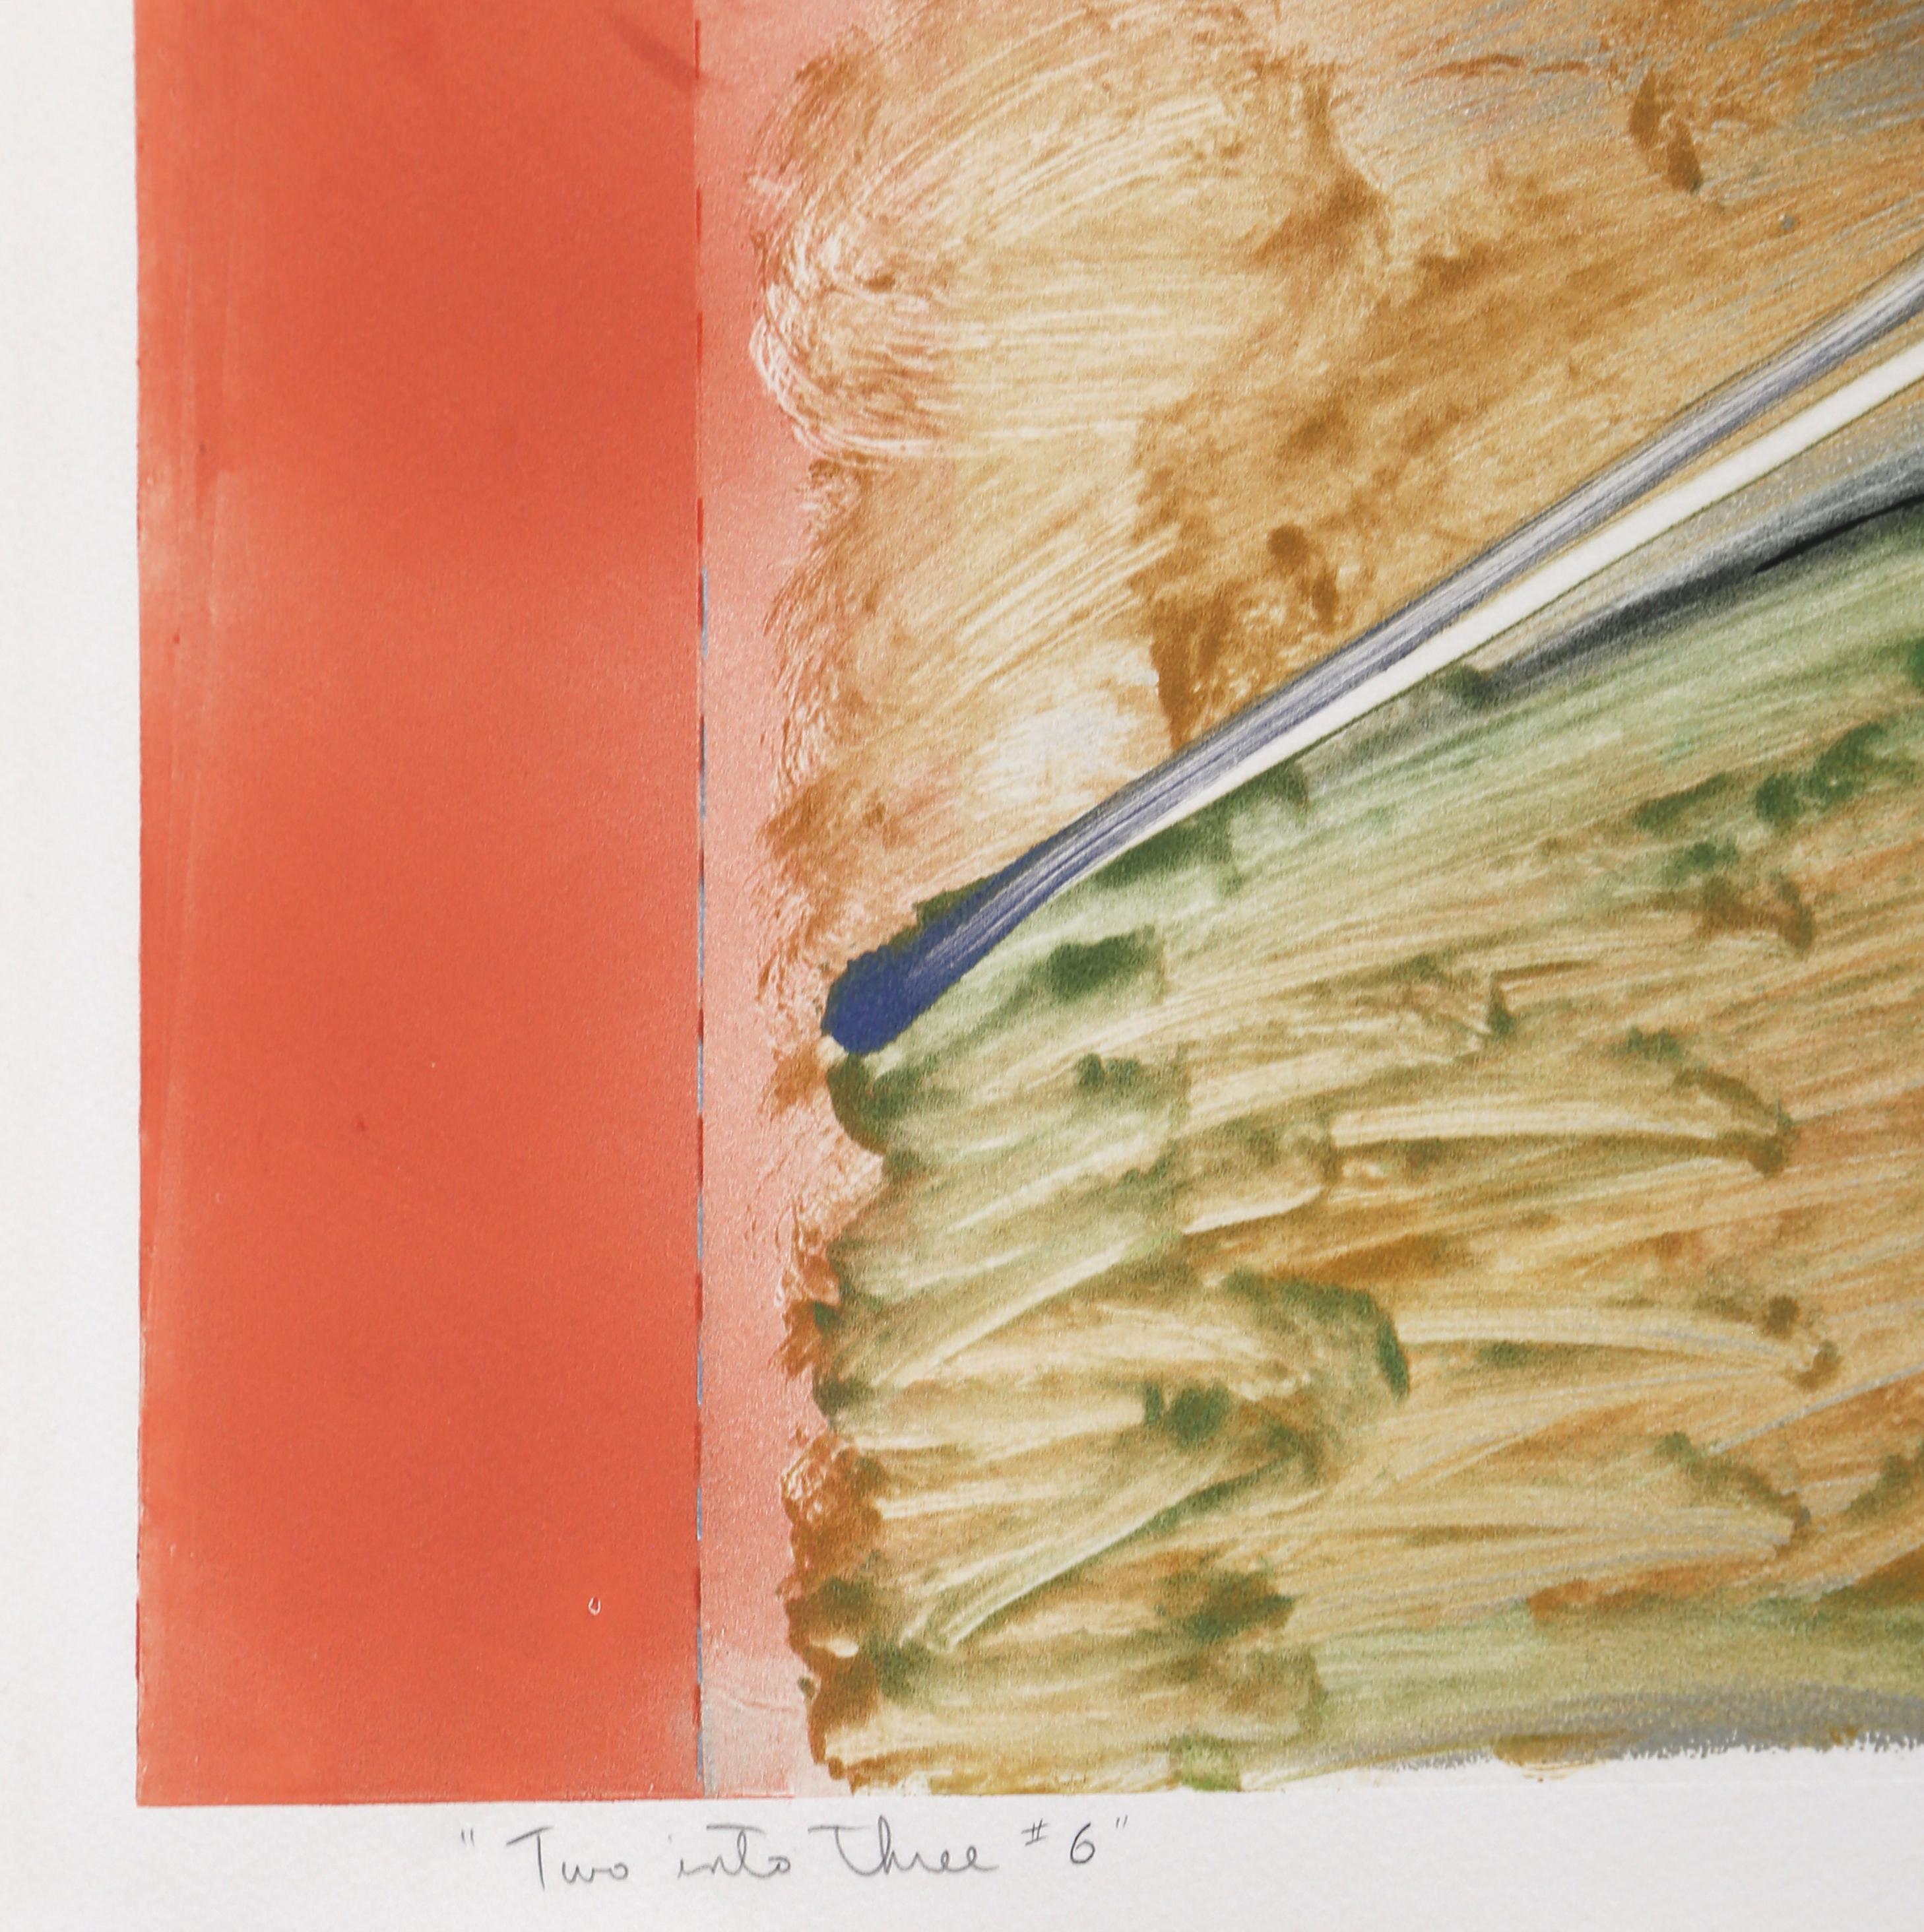 Artist: Julie Richman, American (1945 -   )
Title: Two into Three #6
Year: 1981
Medium: Color Monotype Diptych, signed in pencil
Image Size: 28 x 40 inches
Paper Size: 30 x 42 in. (76.2 x 106.68 cm)